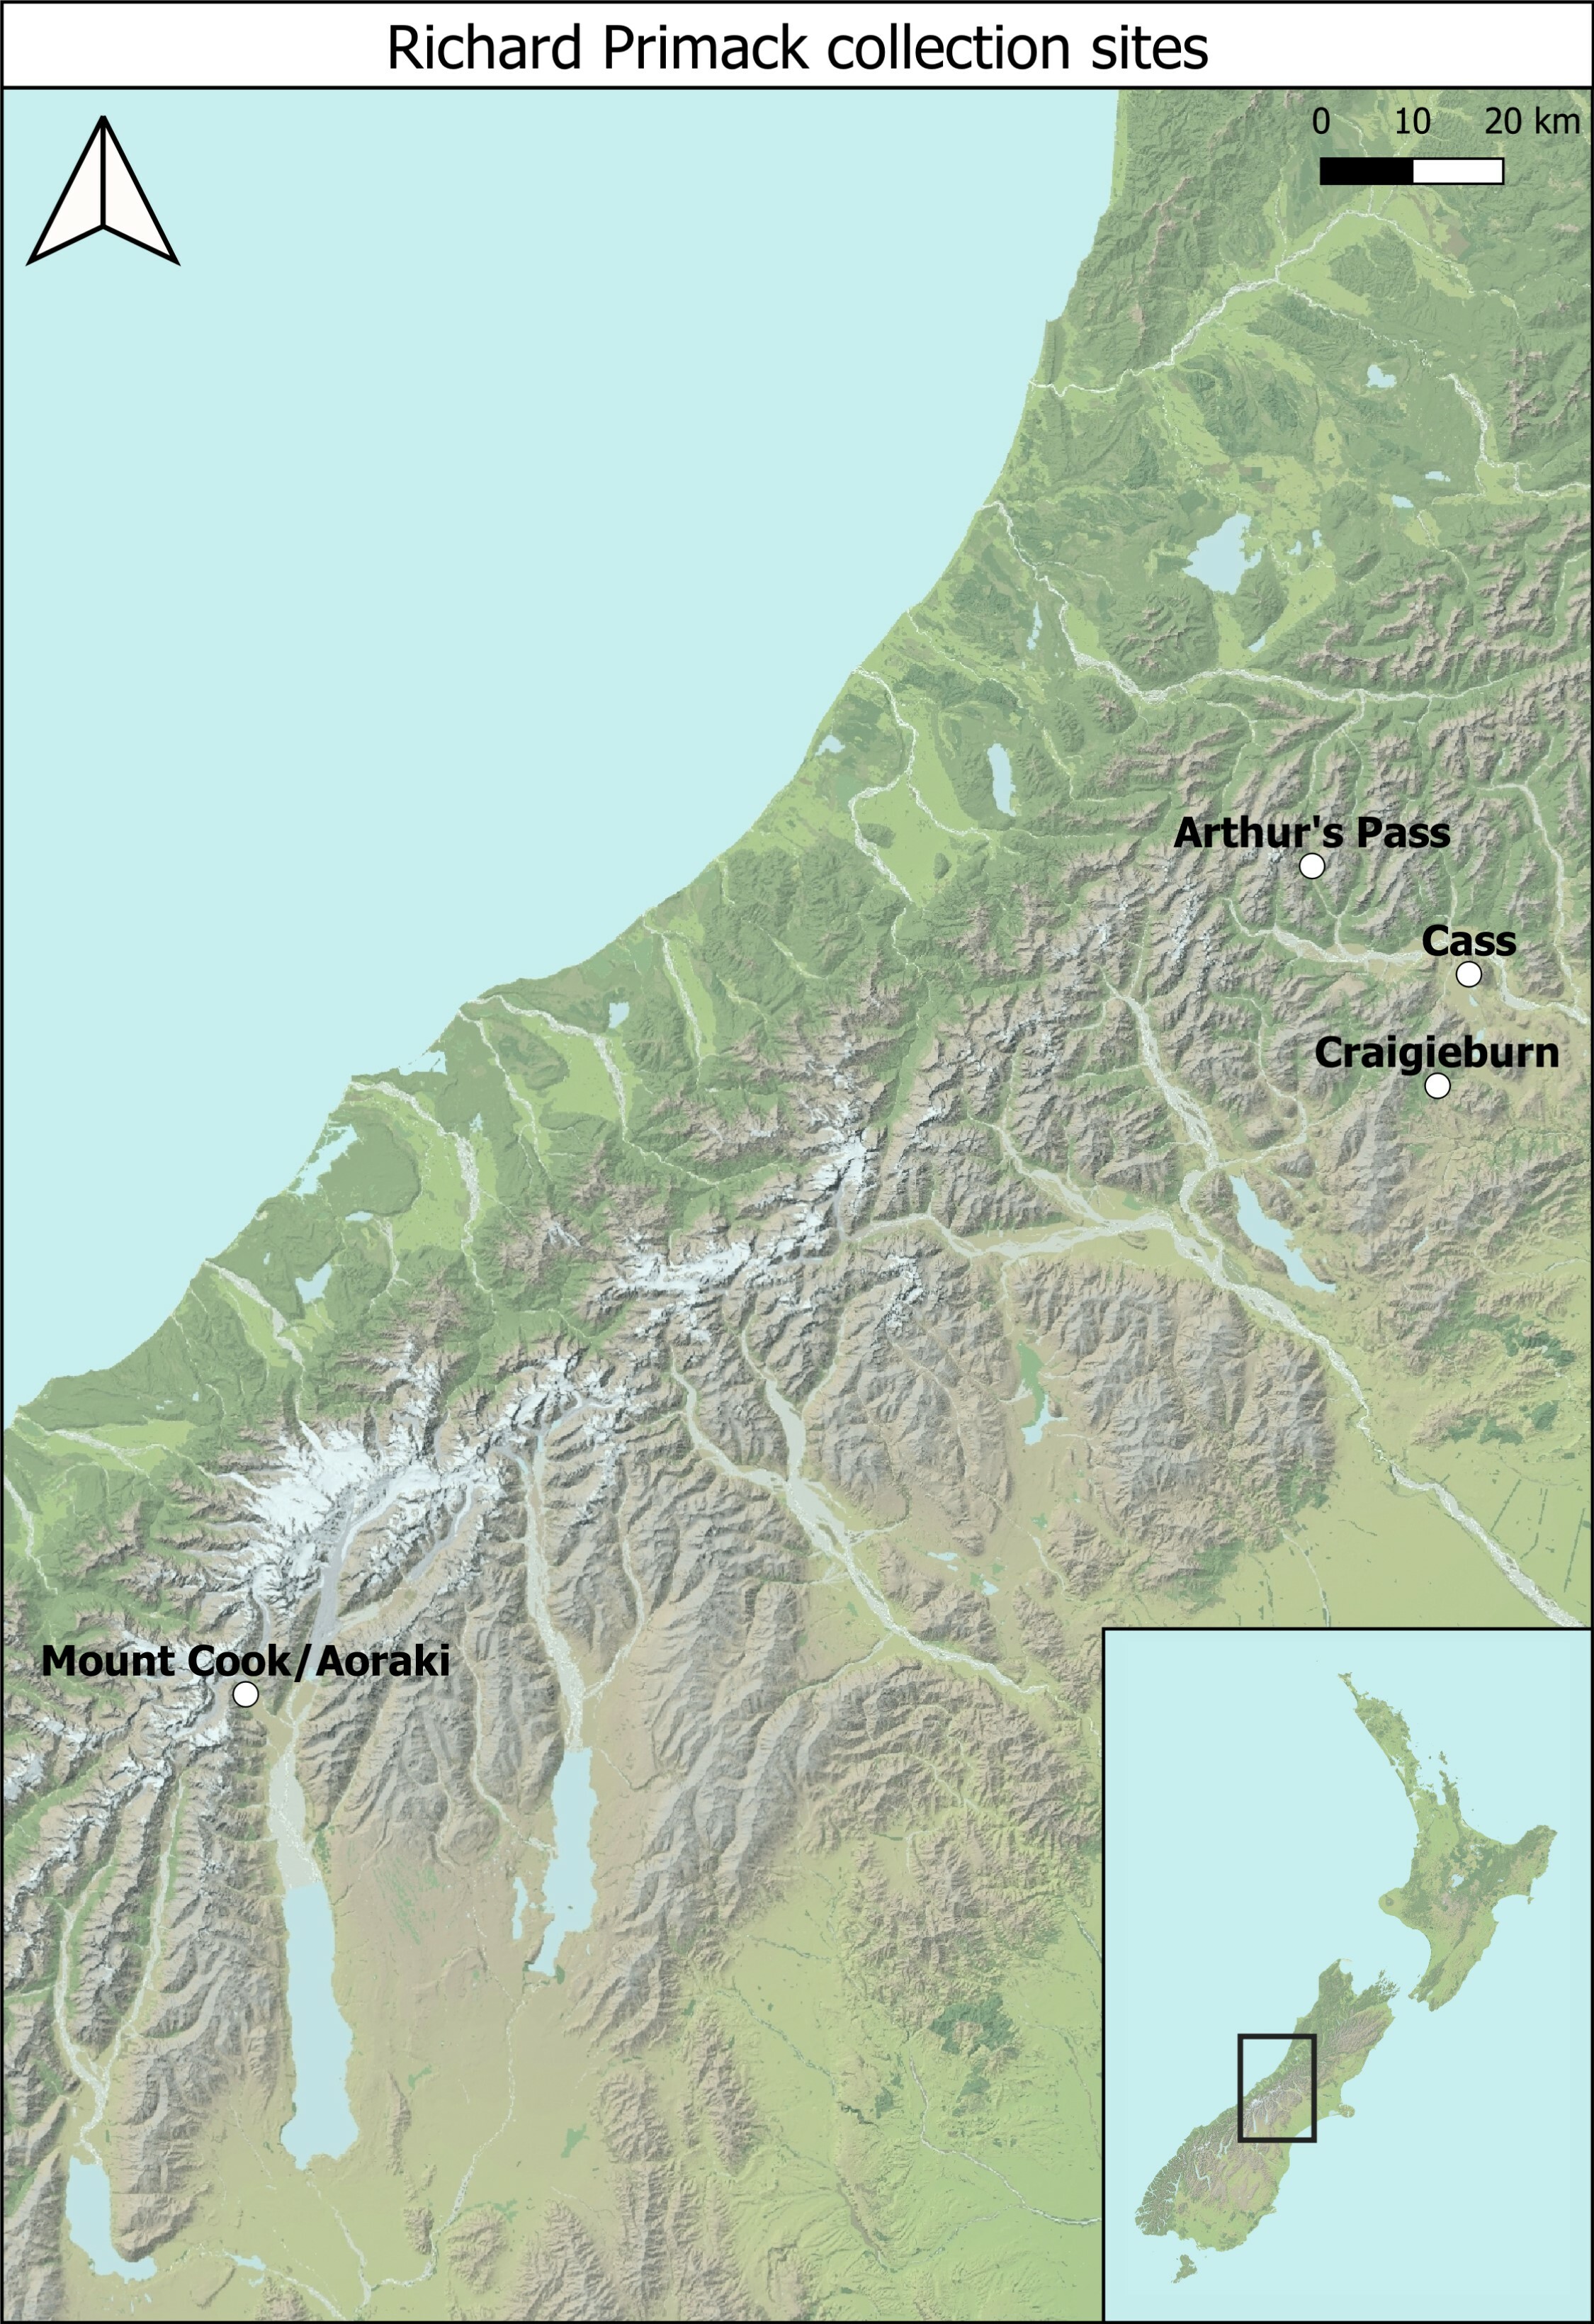 Map of the field collection sites sampled by Primack